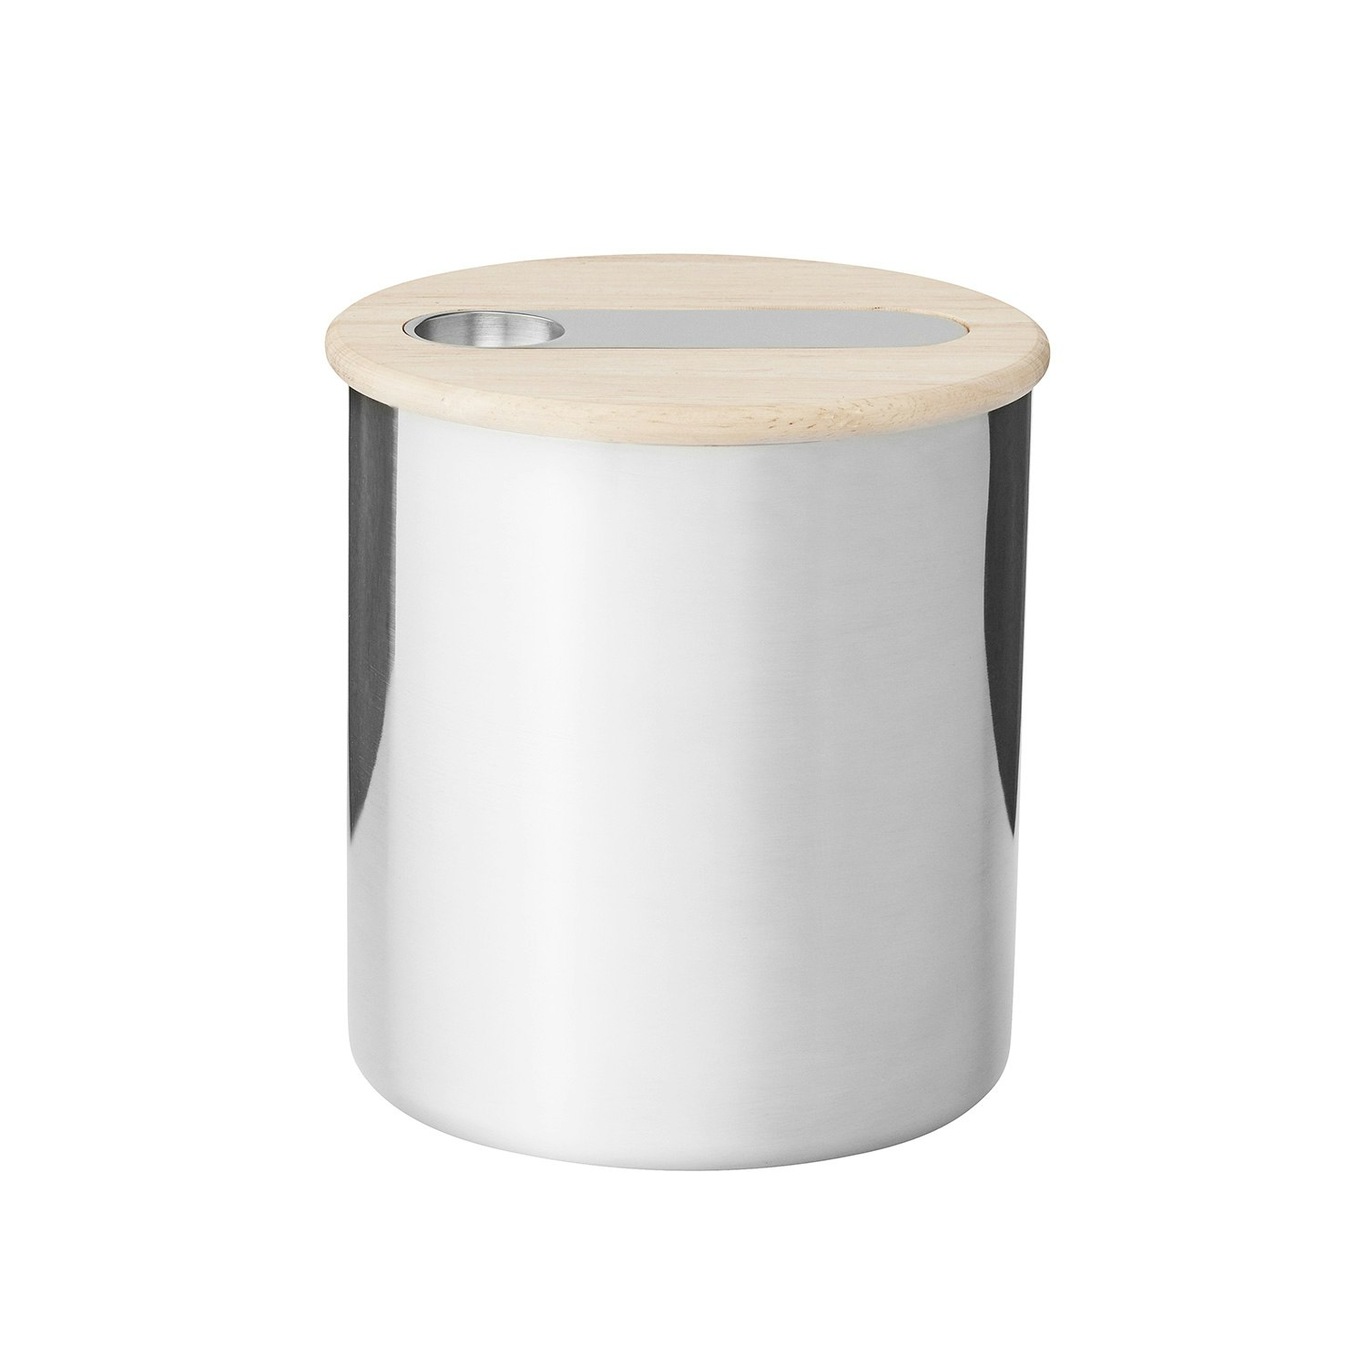 https://royaldesign.com/image/2/stelton-scoop-tea-canister-with-measuring-scoop-0?w=800&quality=80